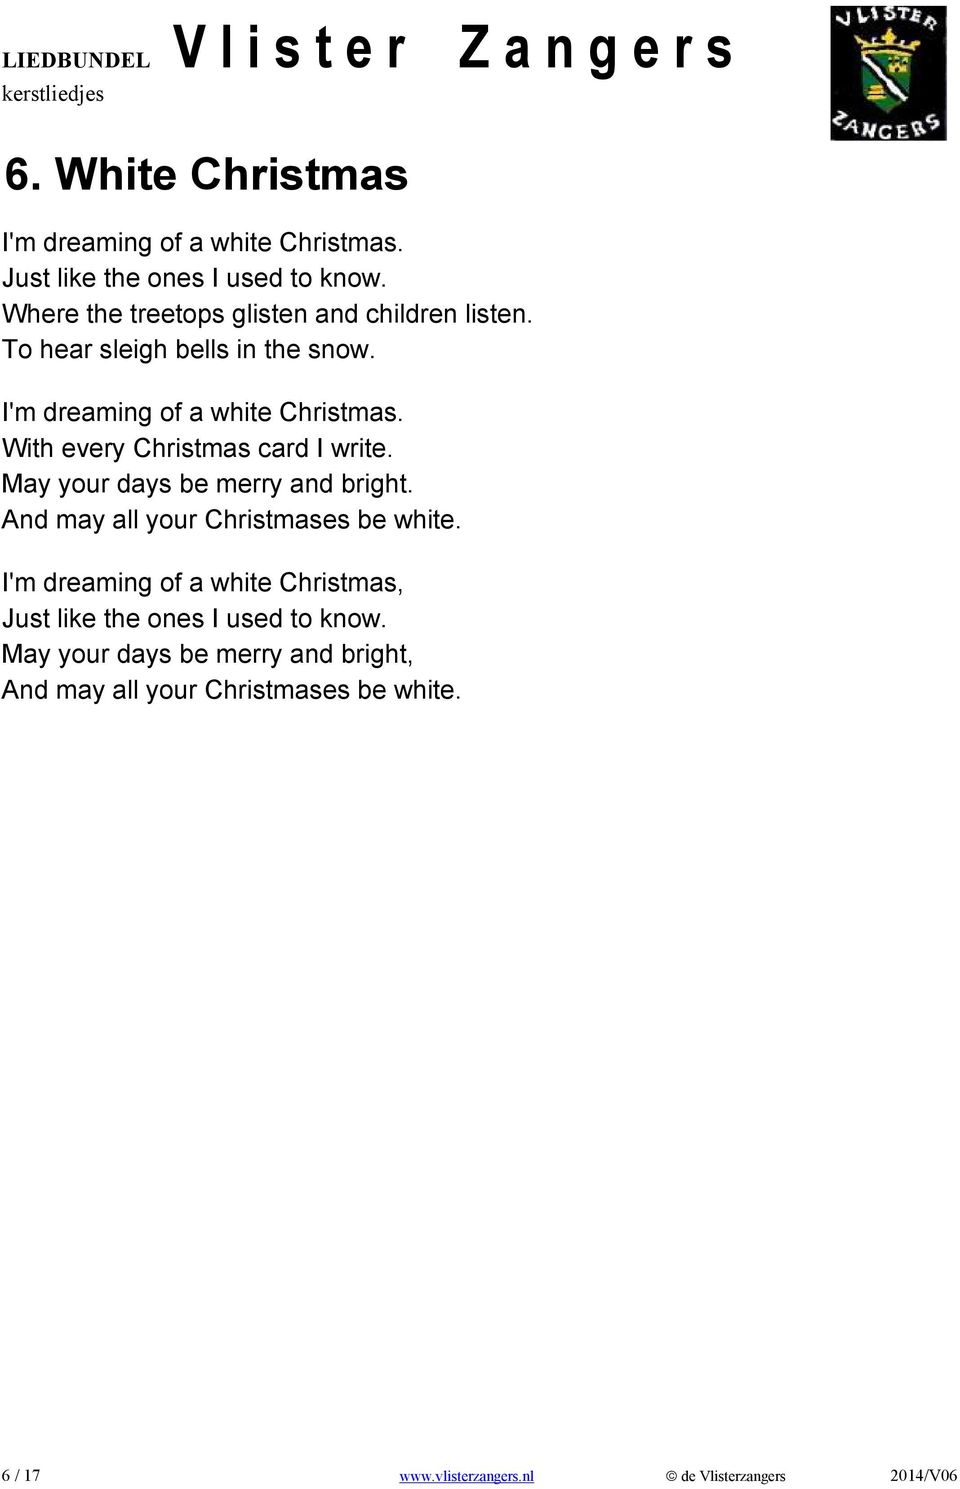 With every Christmas card I write. May your days be merry and bright. And may all your Christmases be white.